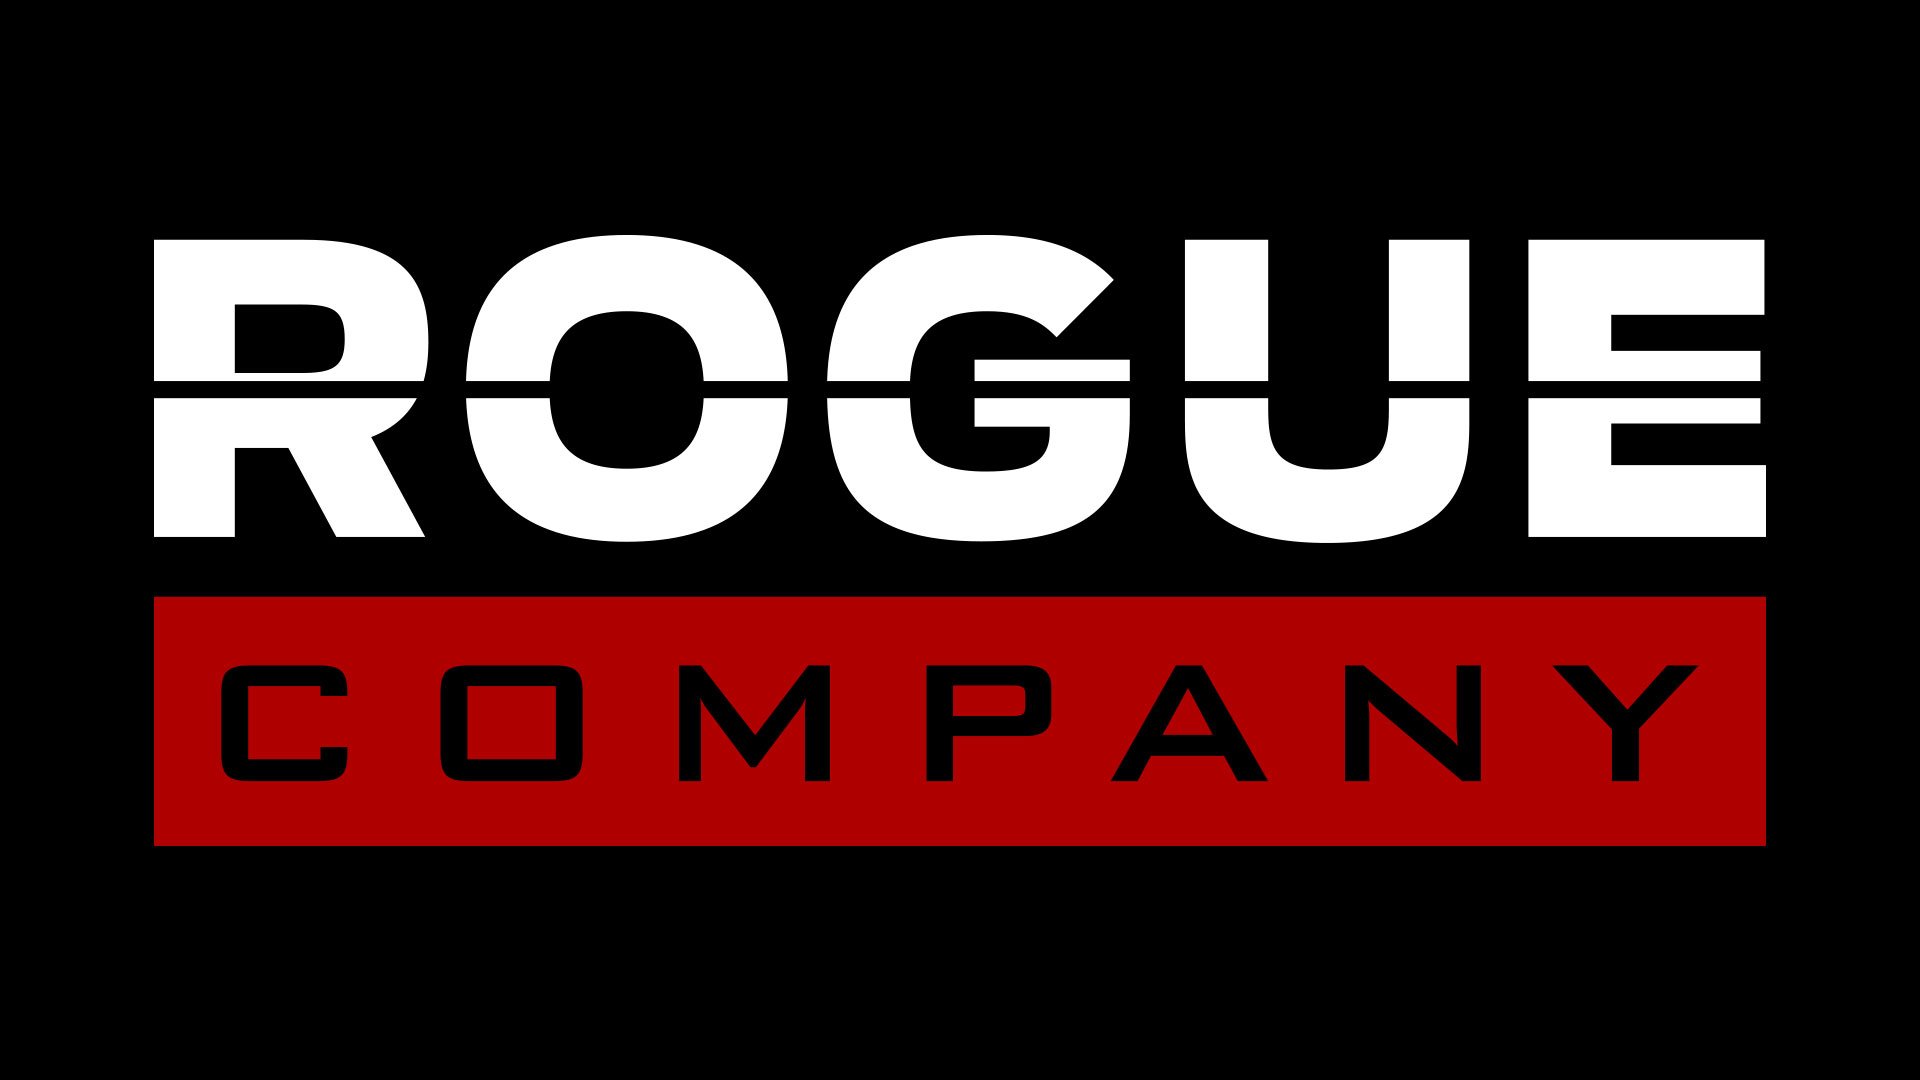 Rogue Company: Everything you need to know